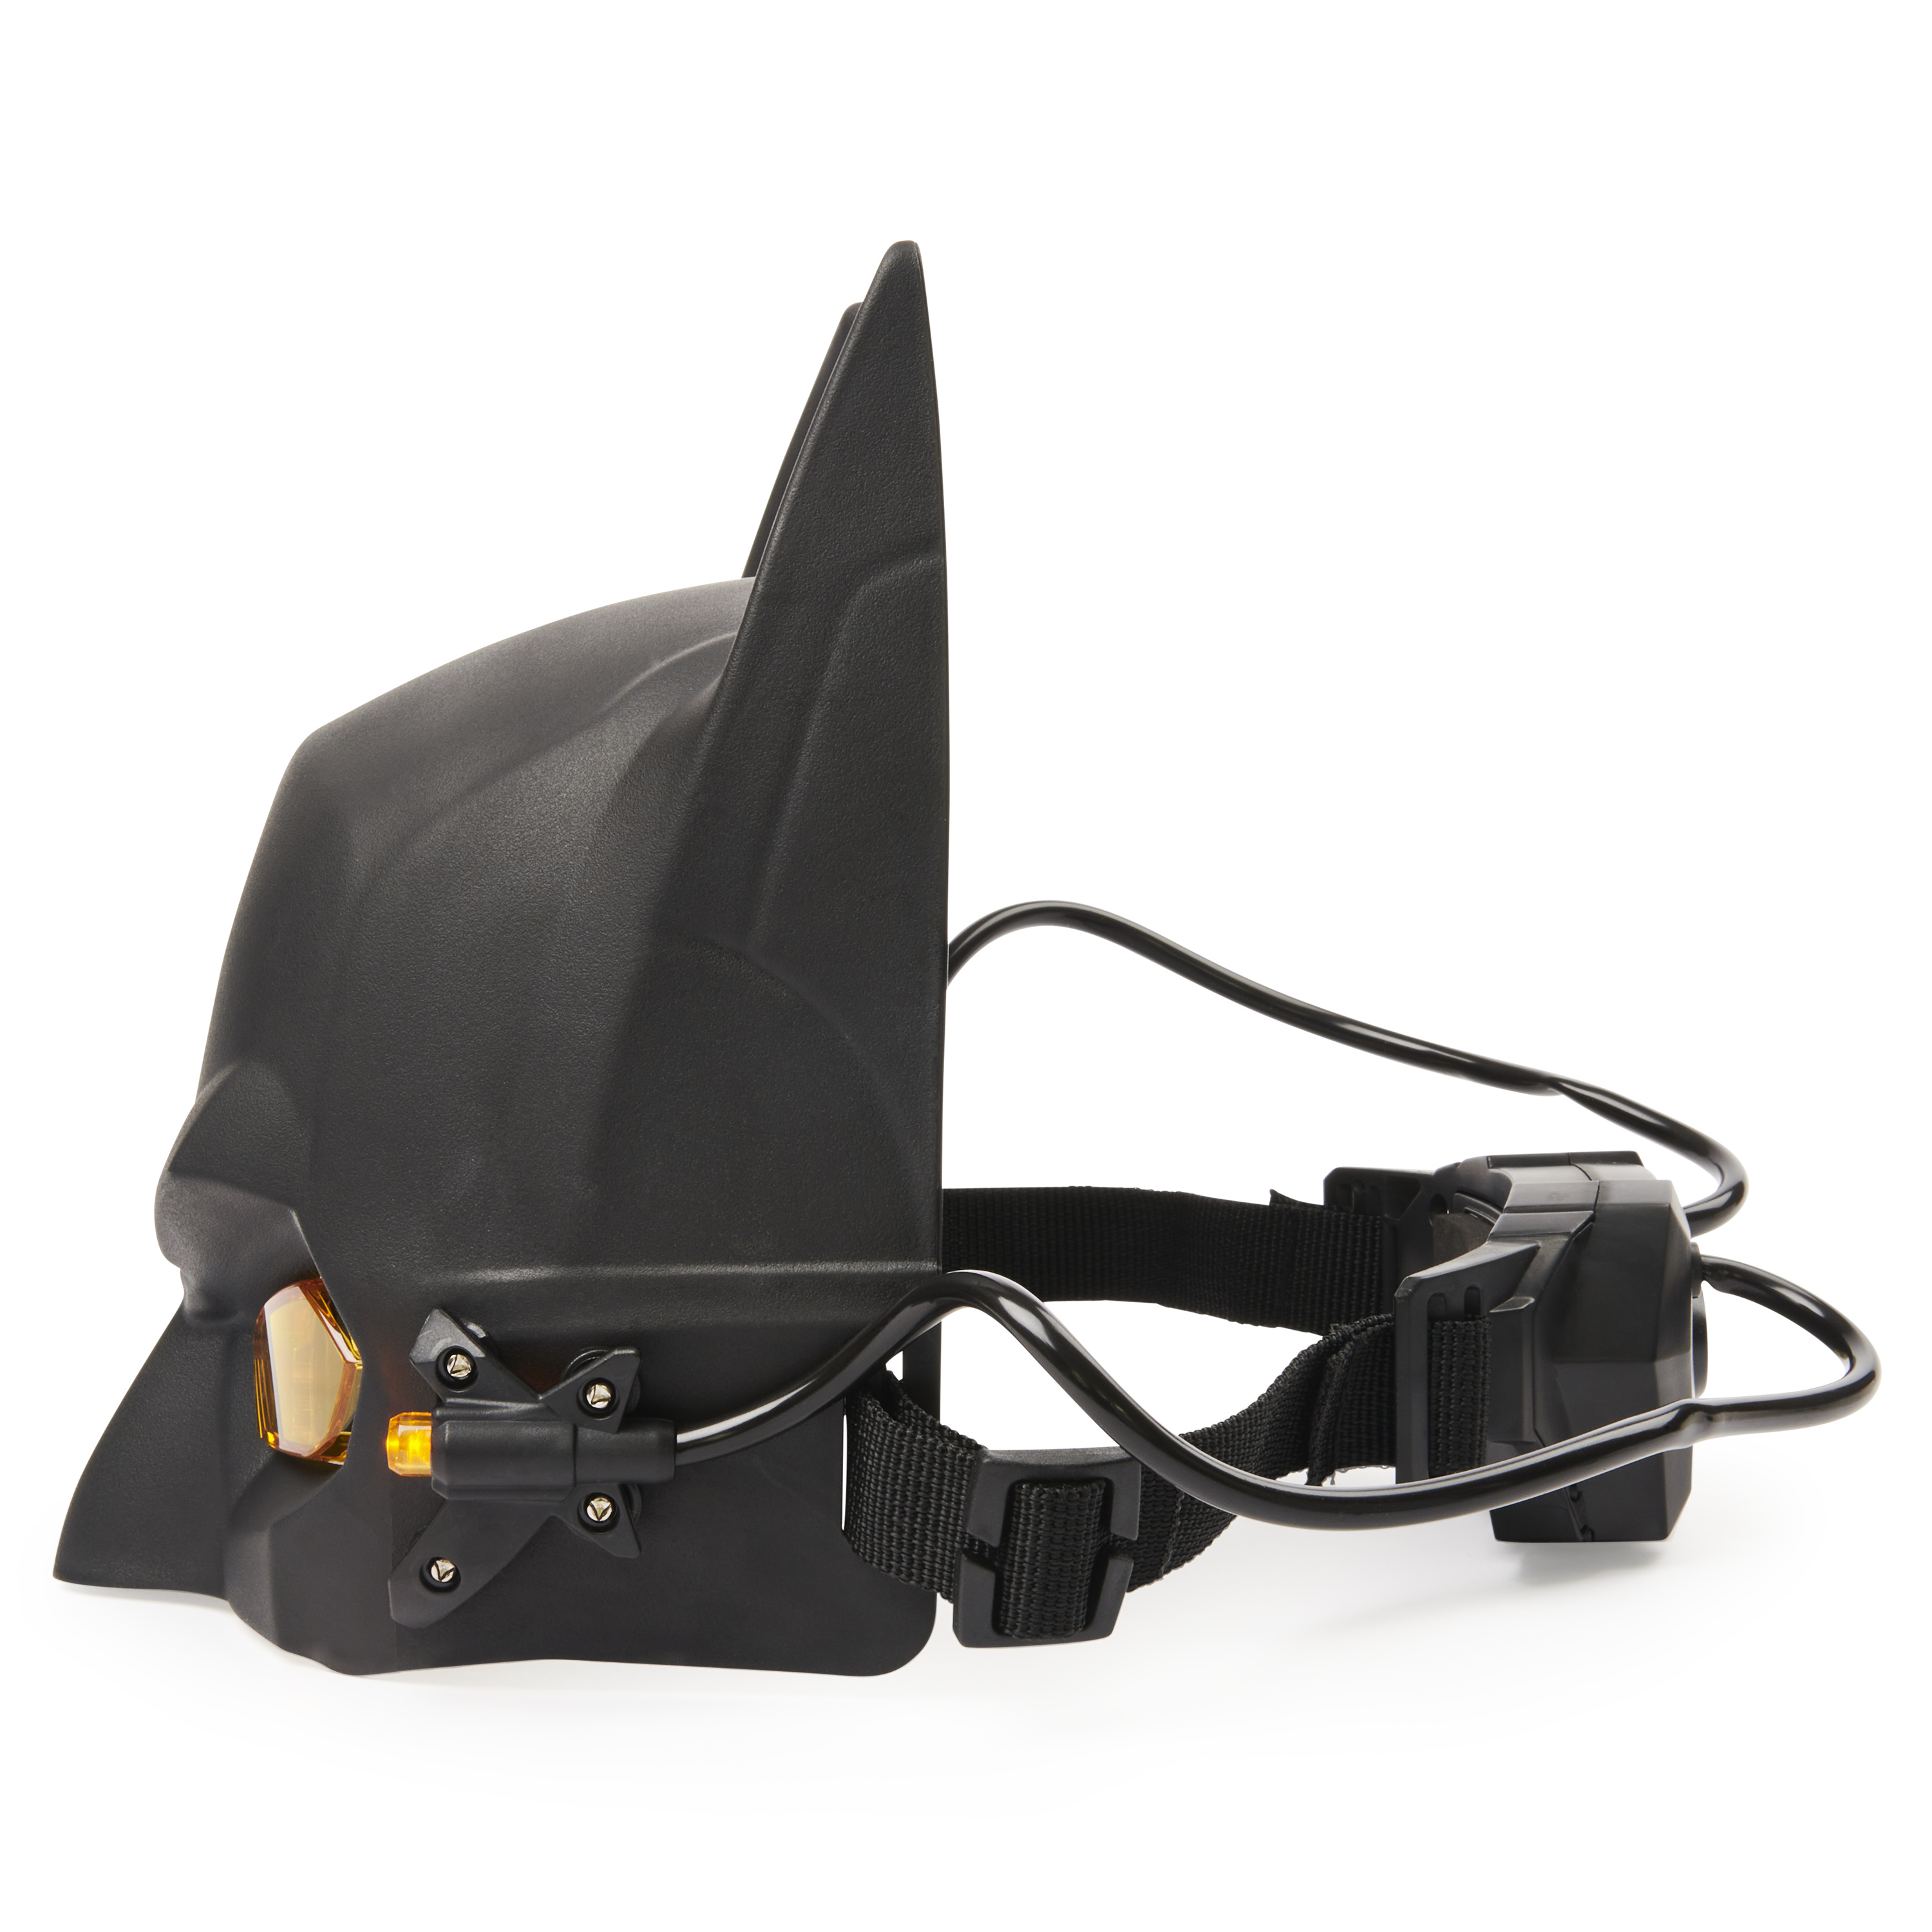 Batman Role-Play Tech Mask with Lights and Magnification Lens, for Kids Aged 4 and up - image 5 of 7